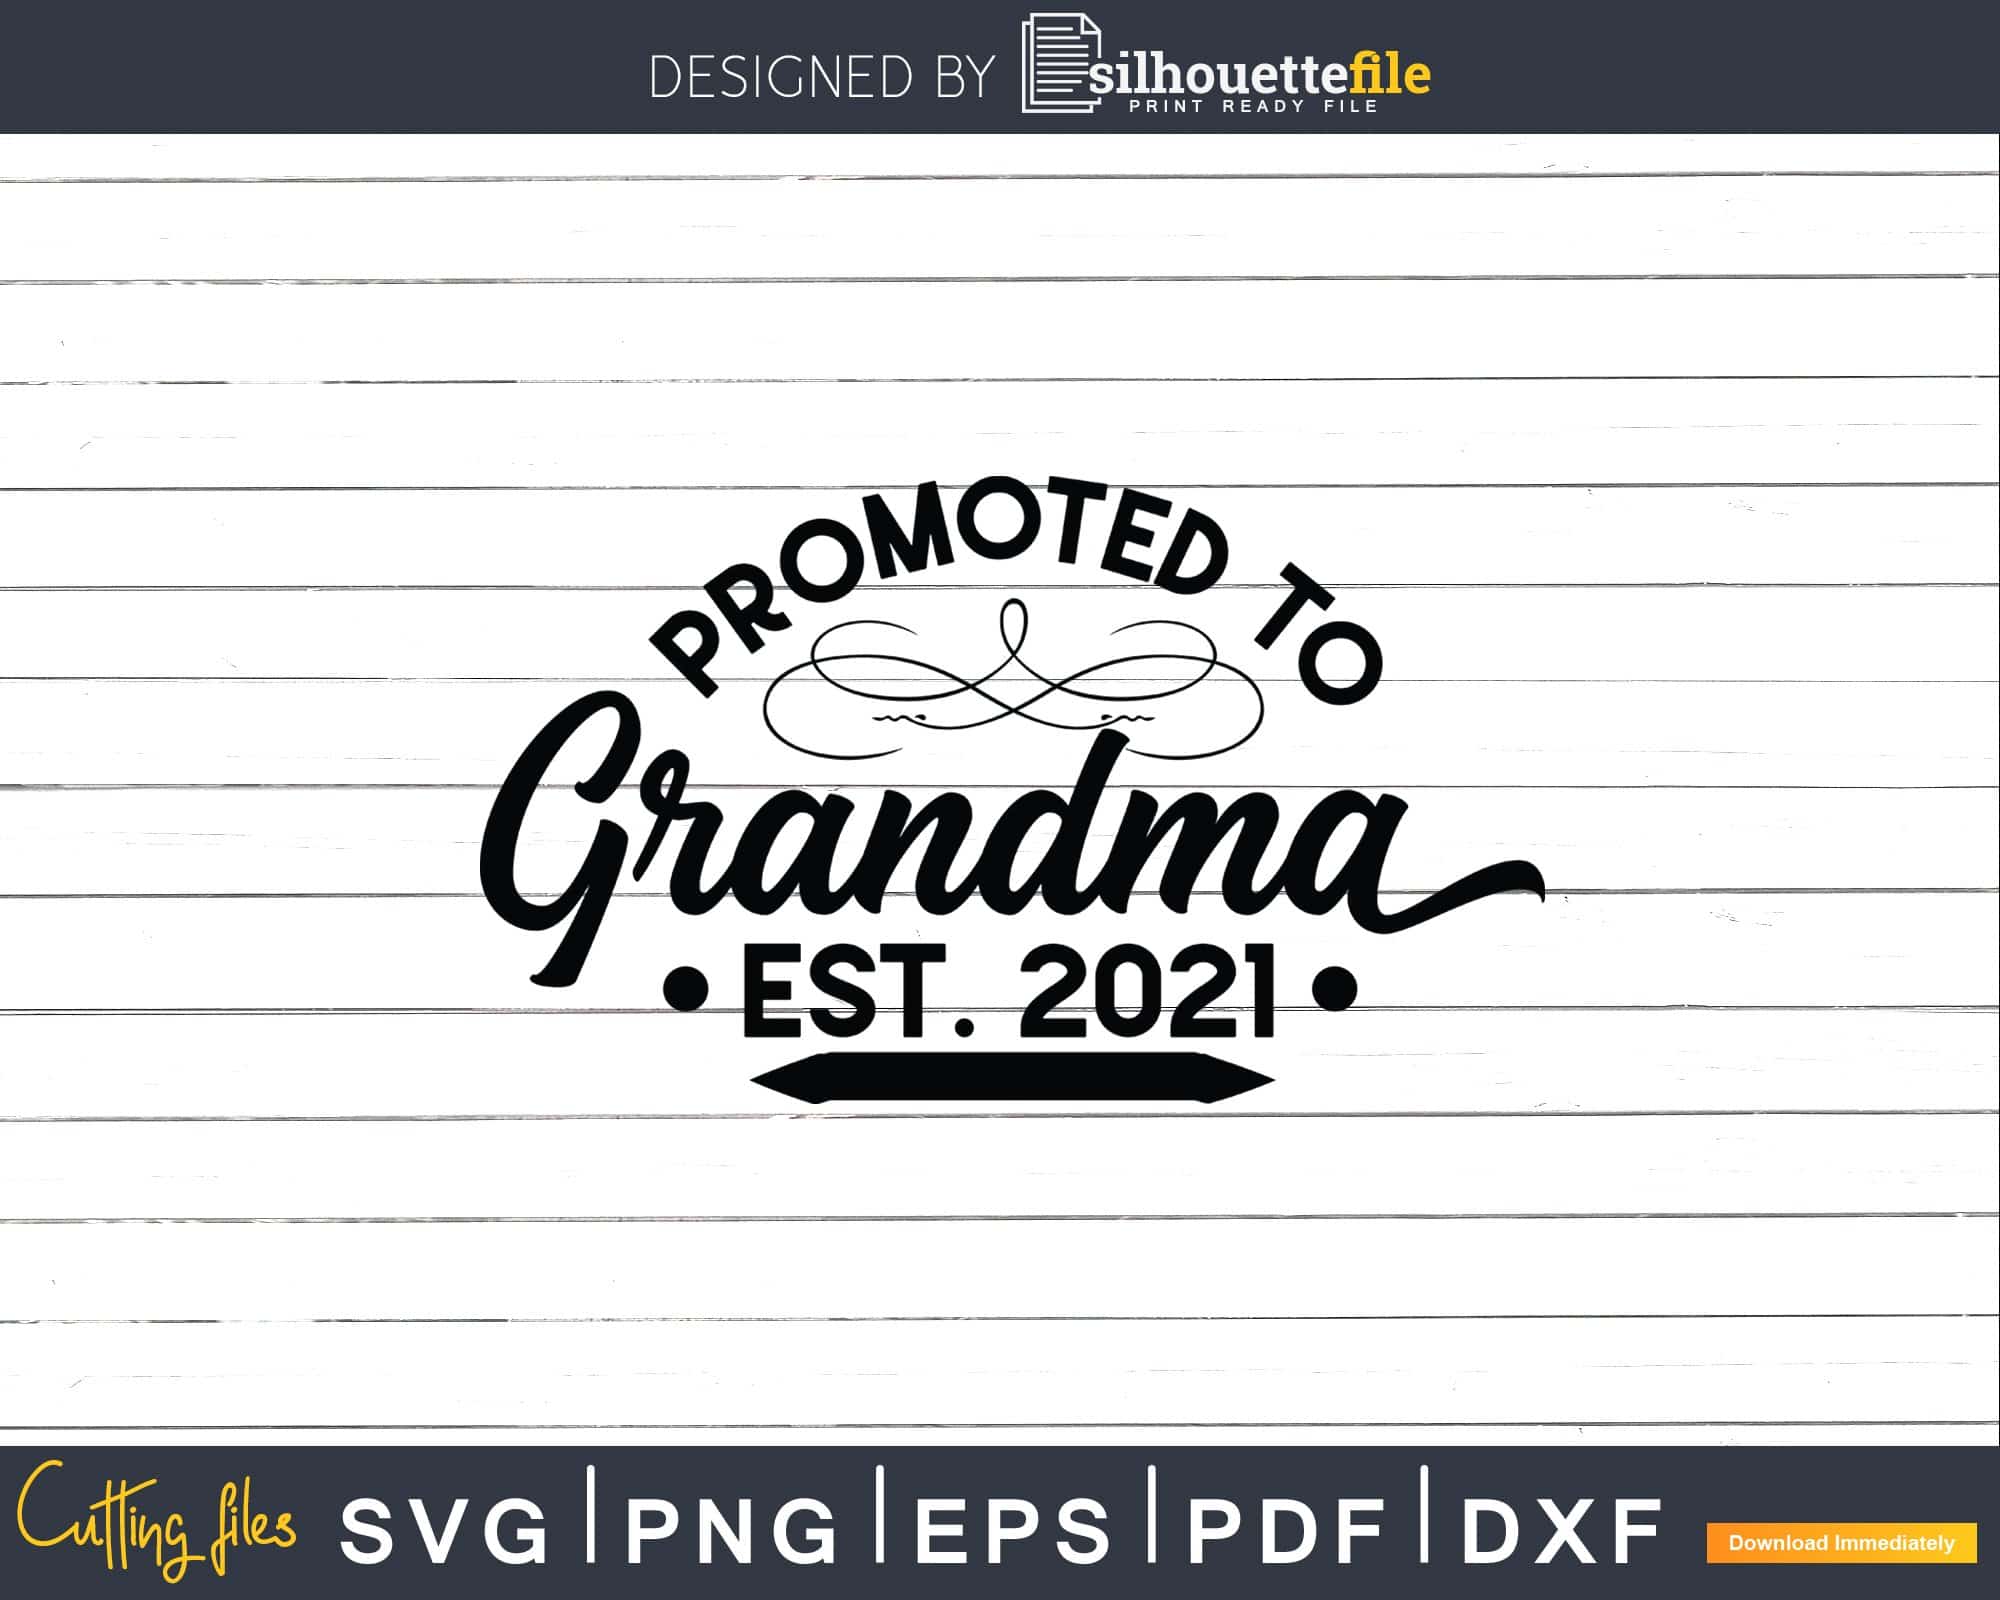 Download Promoted To Grandma Est 2021 Svg Dxf Digital Craft Files Silhouettefile